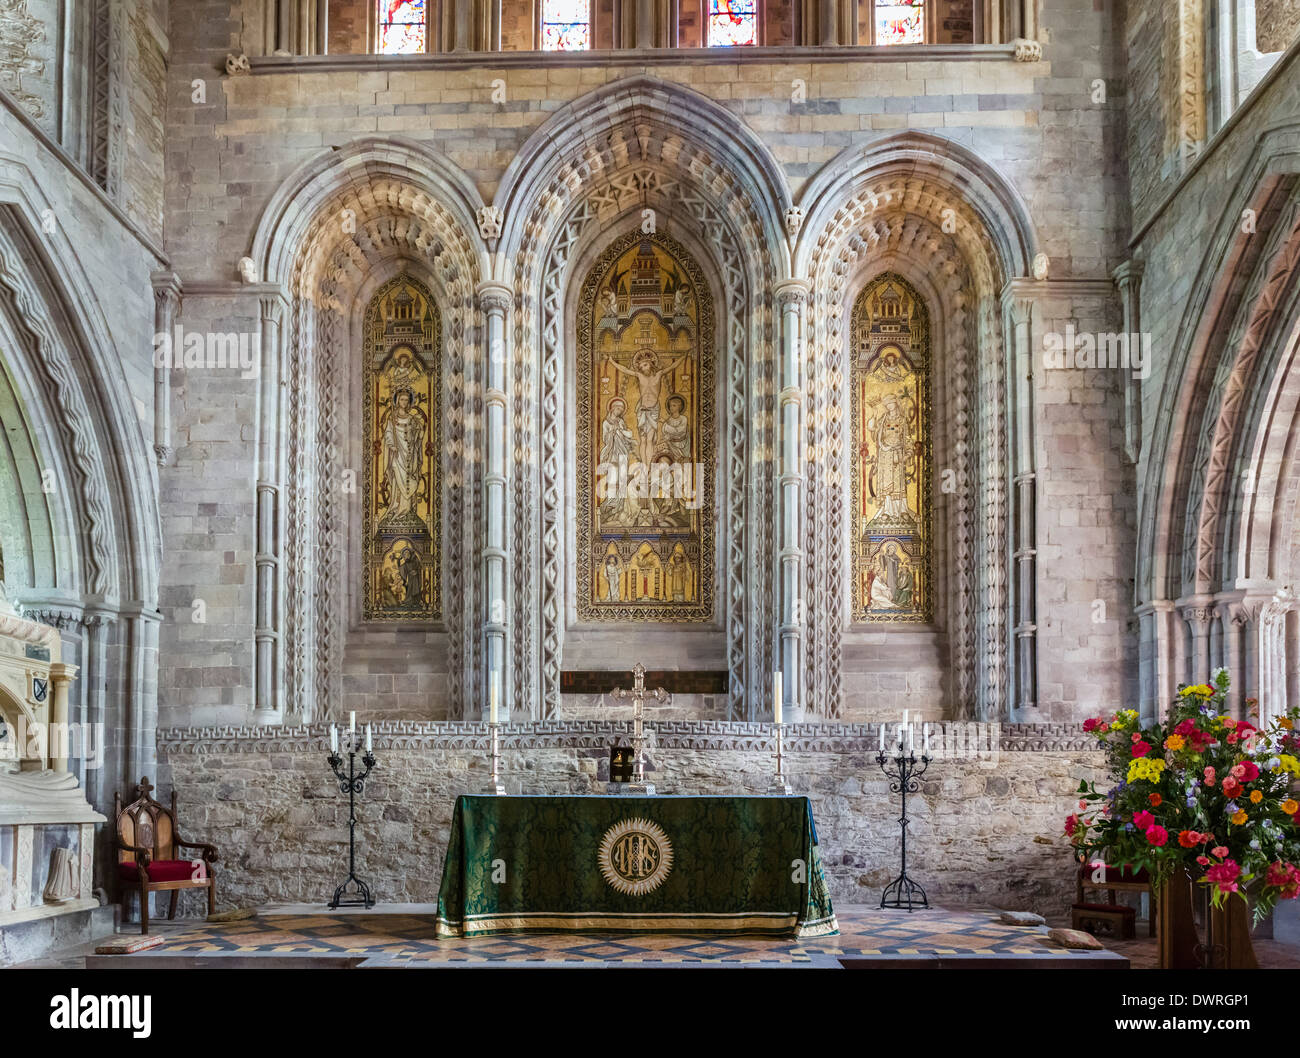 The High Altar in St David's Cathedral, St David's, Pembrokeshire, Wales, UK Stock Photo